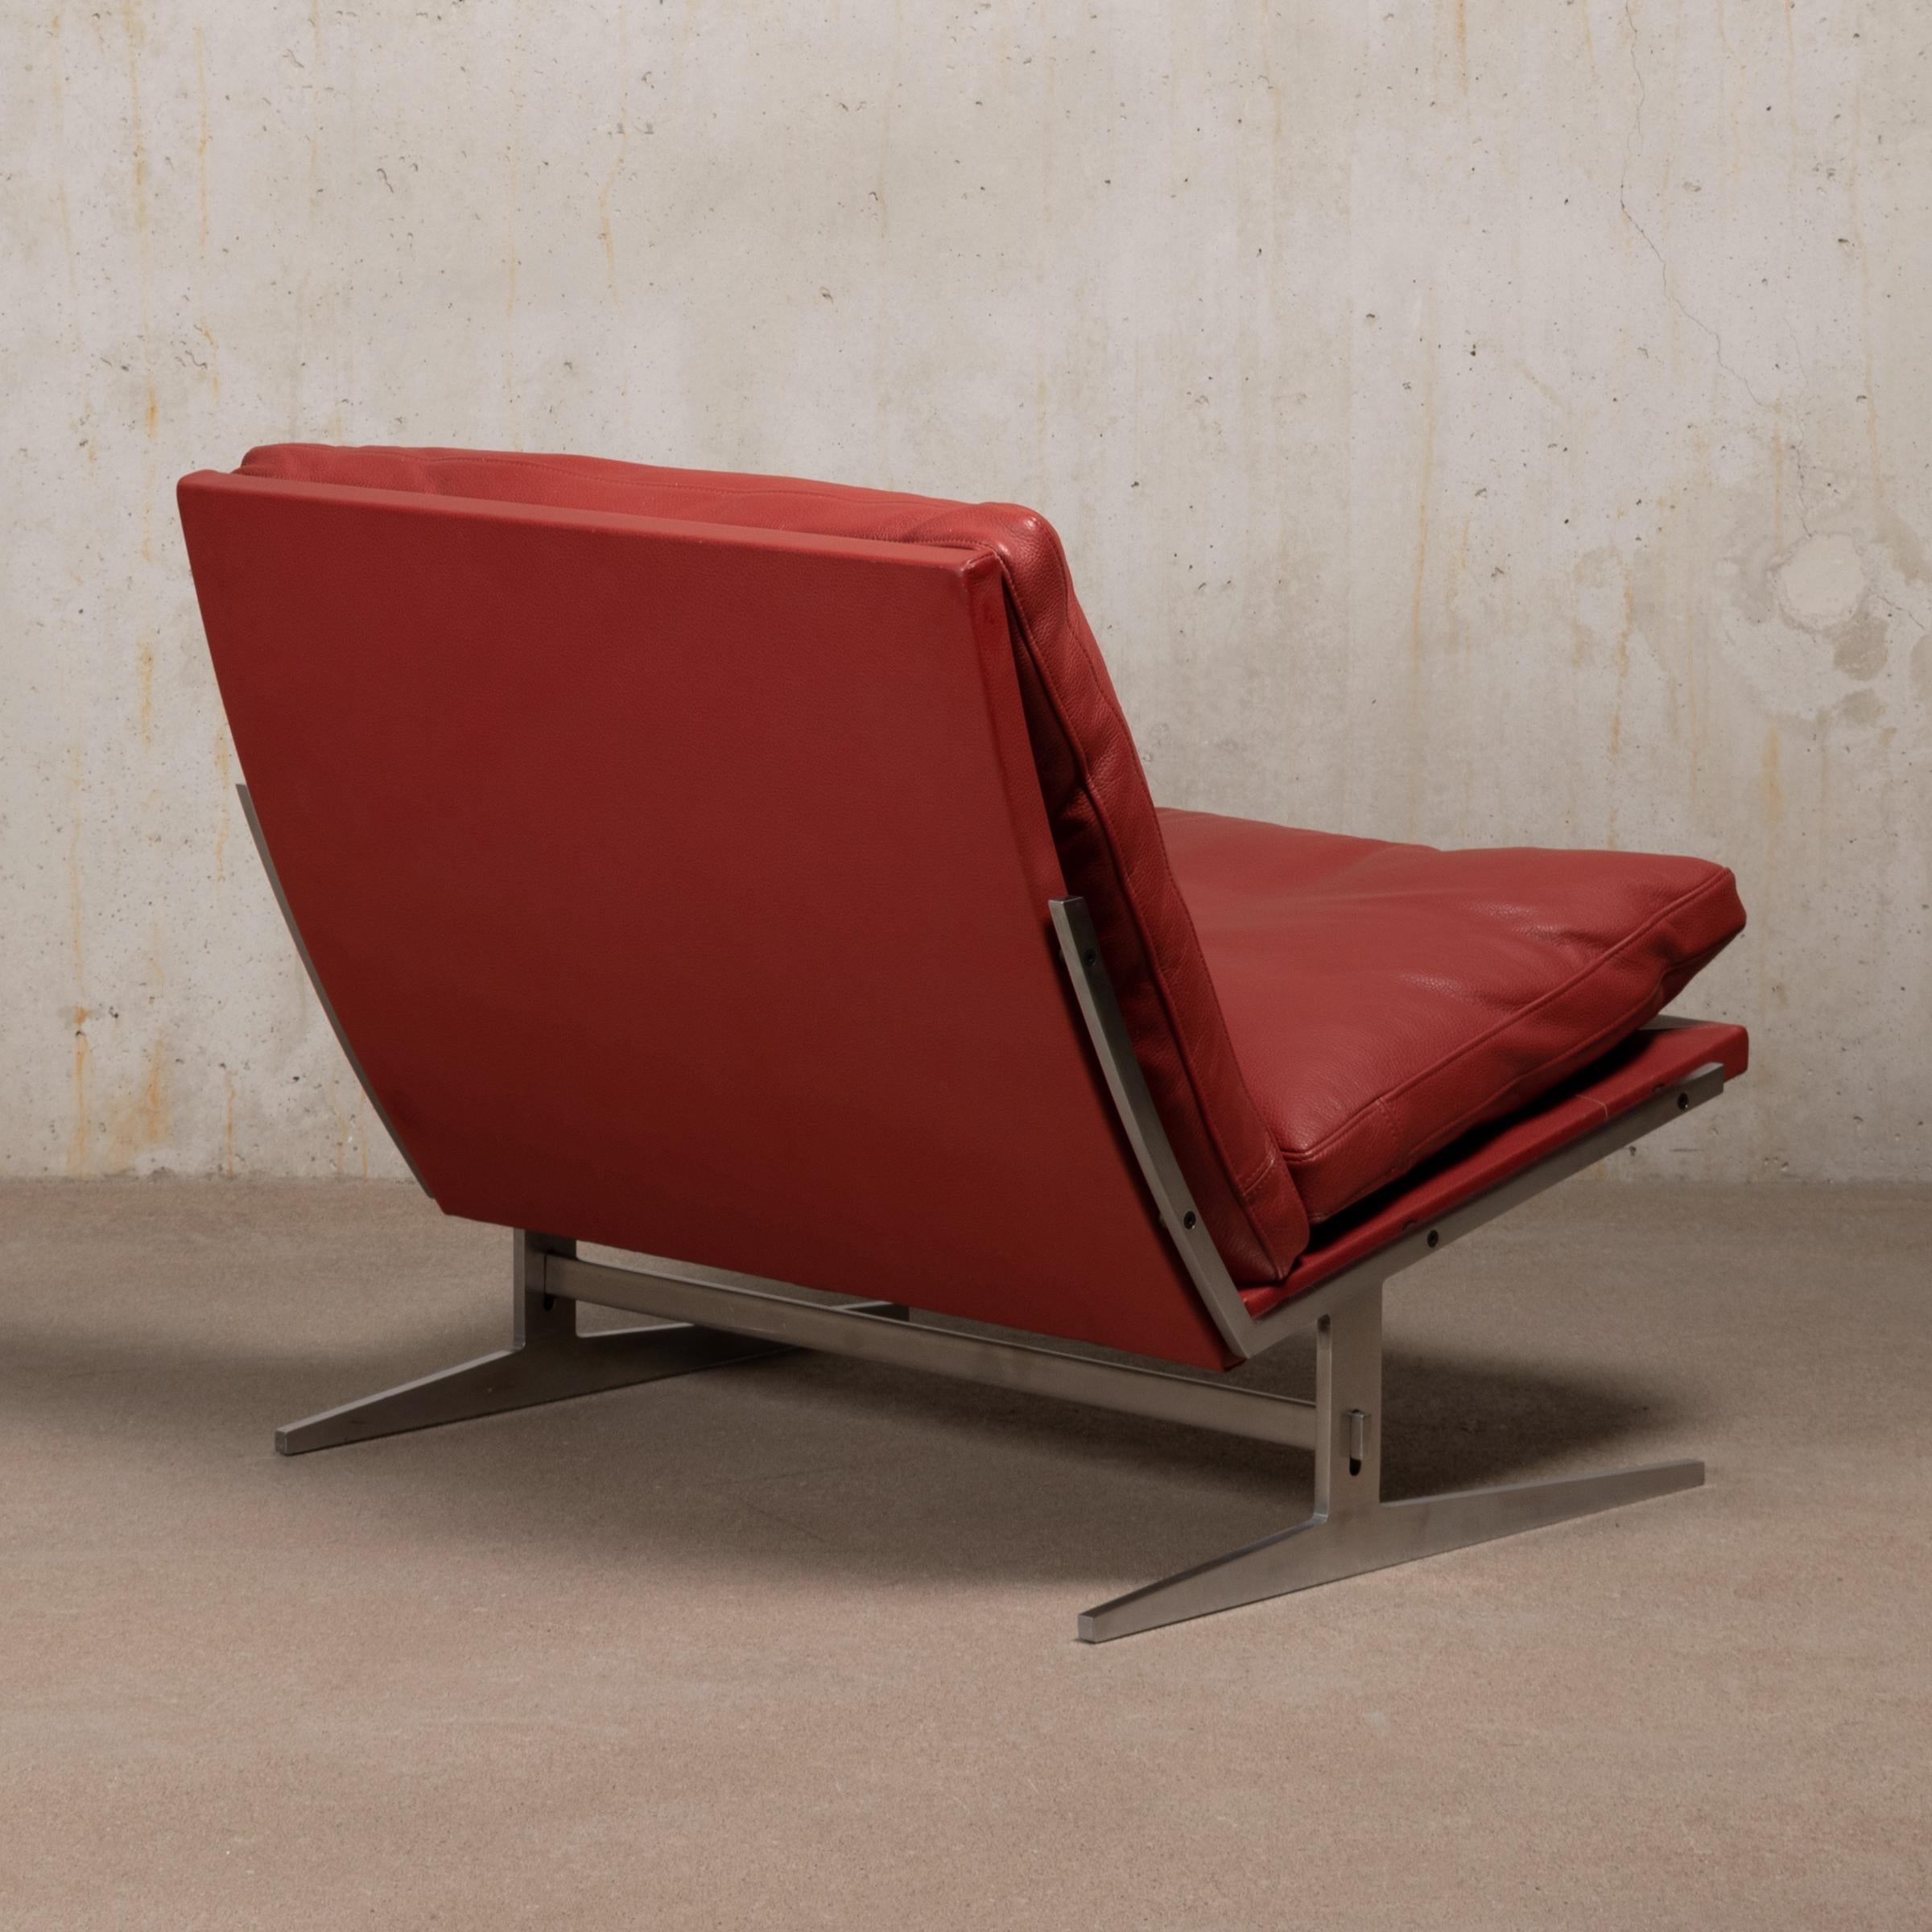 Danish Kastholm & Fabricius BO-561 Lounge Chair in Ruby Red Leather by Bo-Ex Denmark